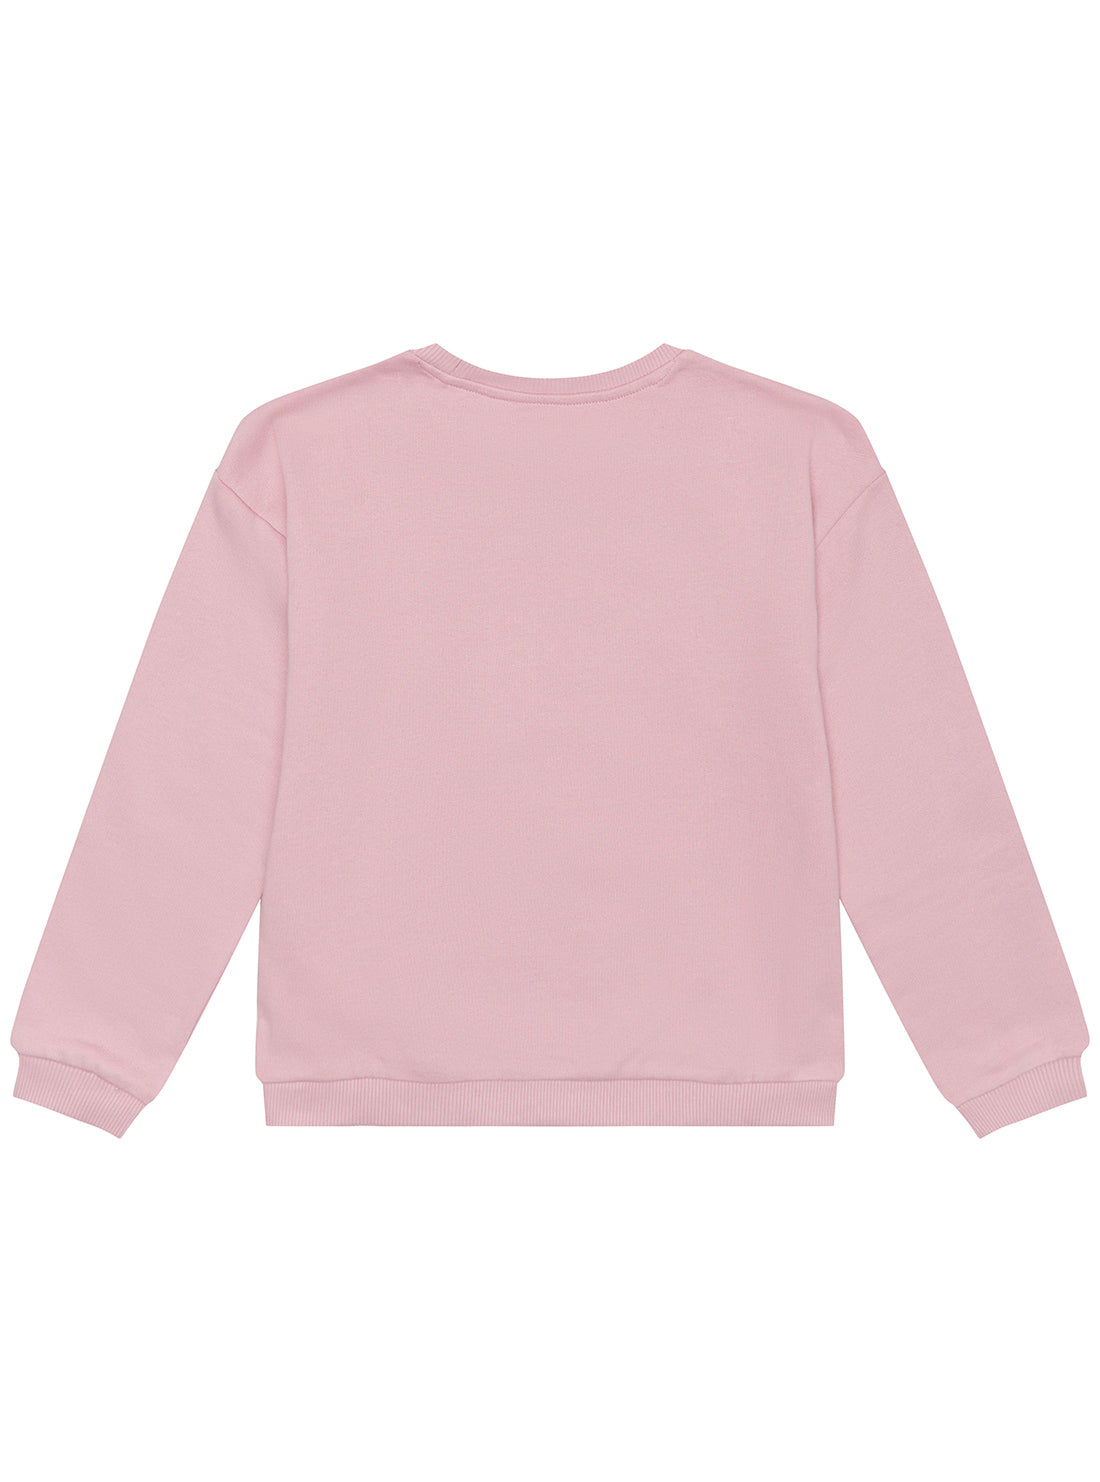 GUESS Pink Long Sleeve Jumper (2-7) back view